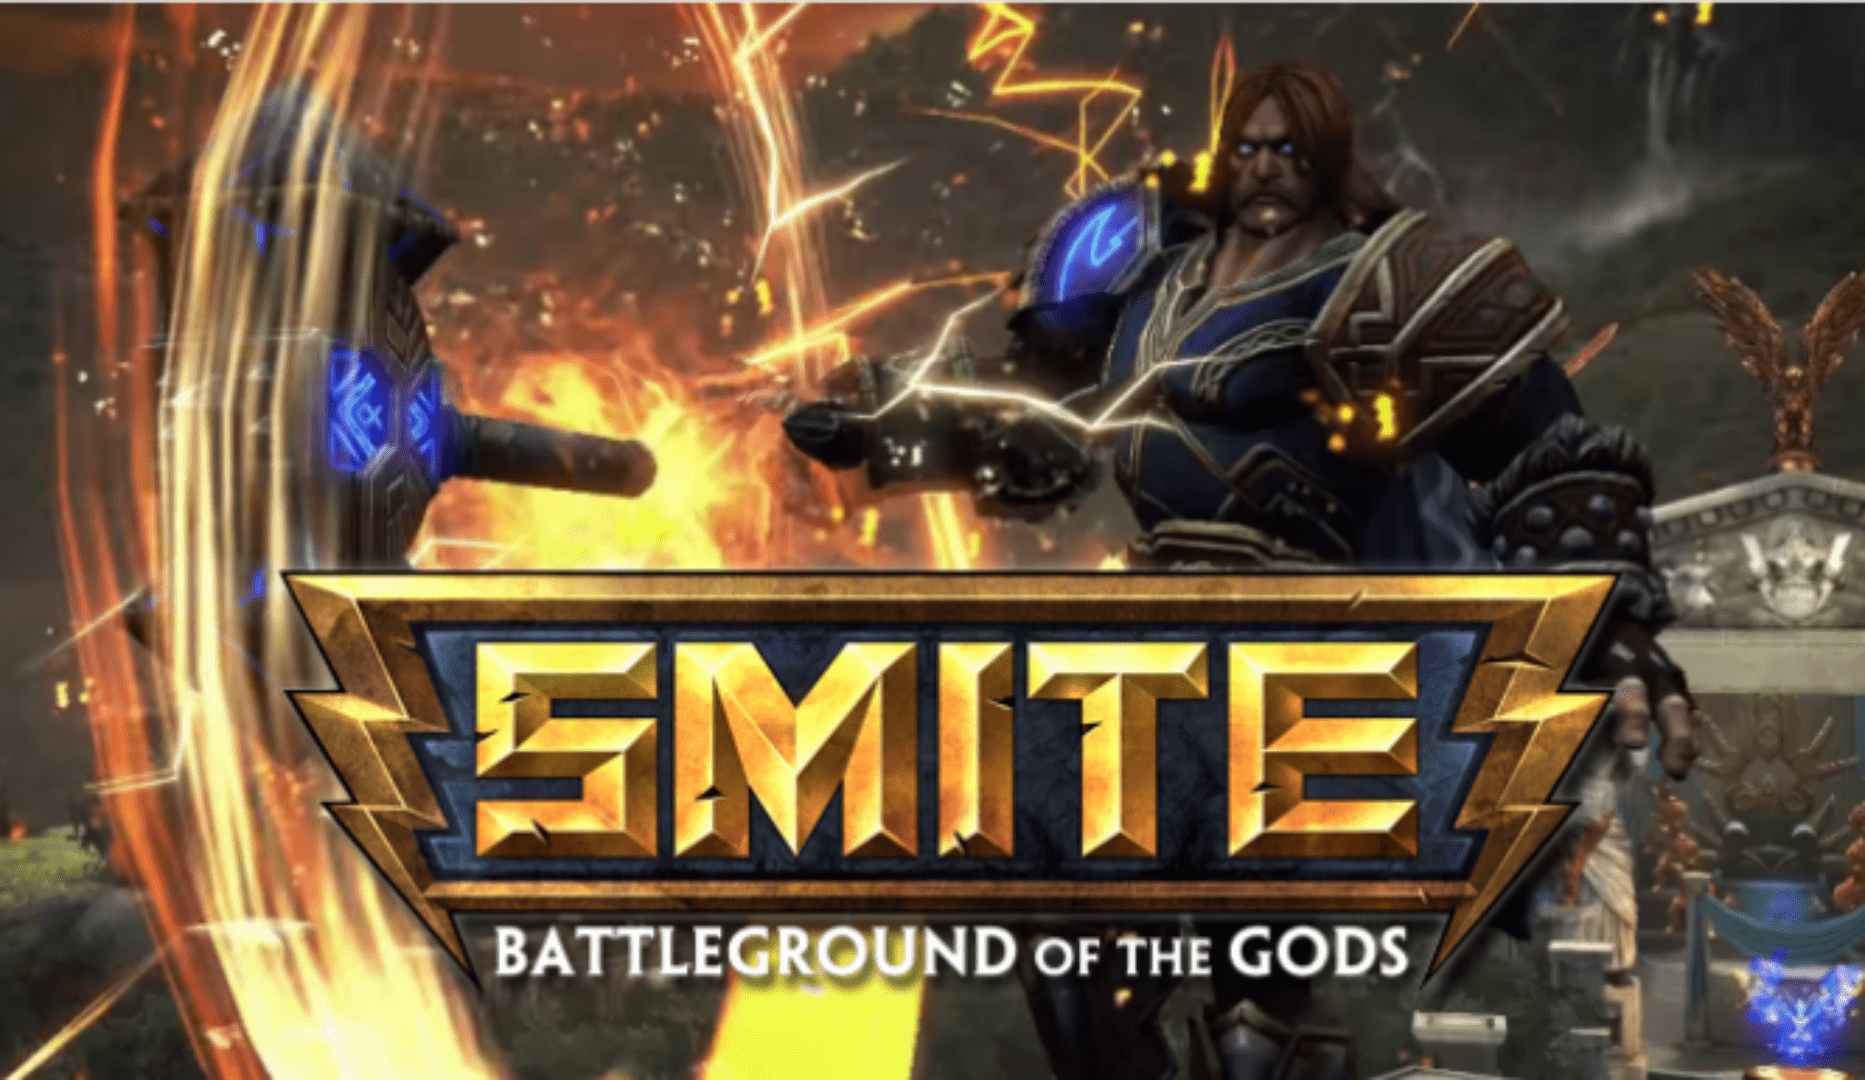 PAX East 2015: Smite Xbox One Hands-on Preview